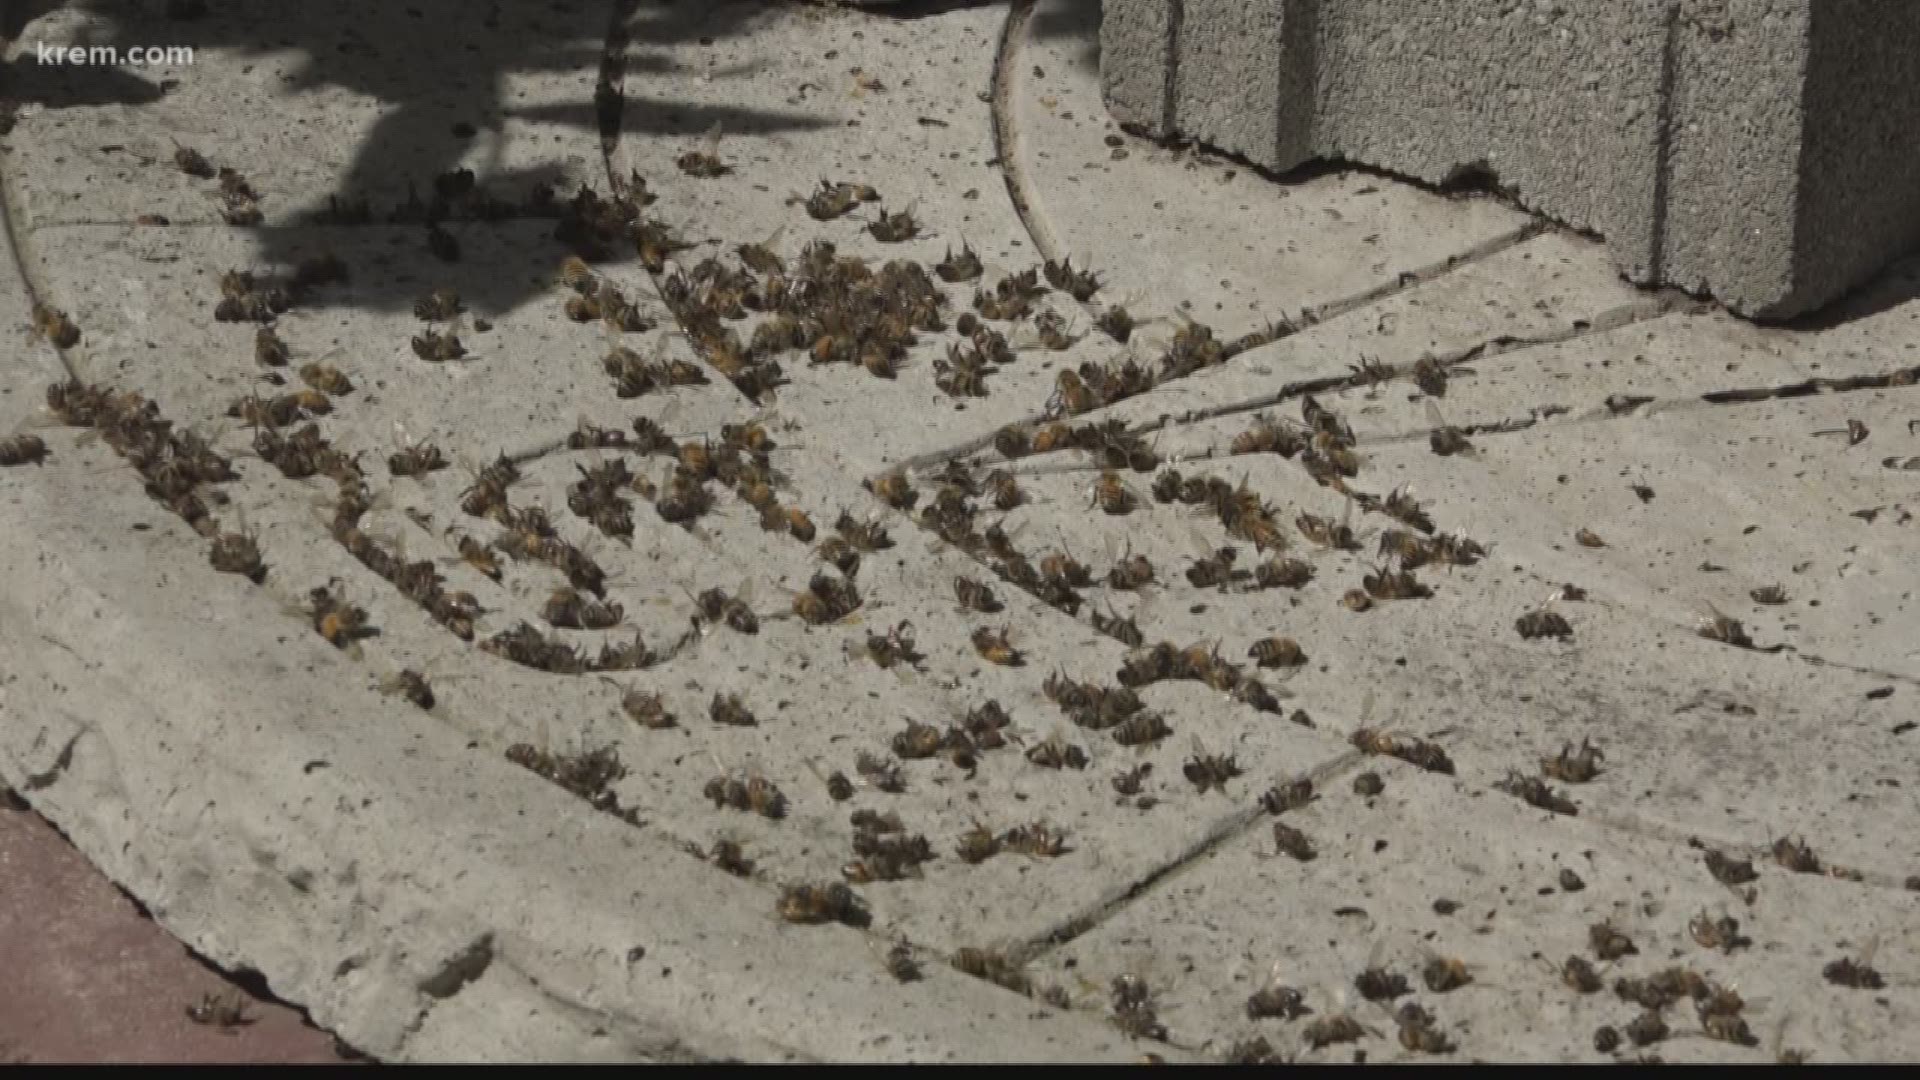 Because of KREM 2's reporting this week, "bee investigators" with the Department of Agriculture opened a case to look into what caused thousands of bees to die in Spokane. KREM 2's Tim Pham was there as they began their investigation.